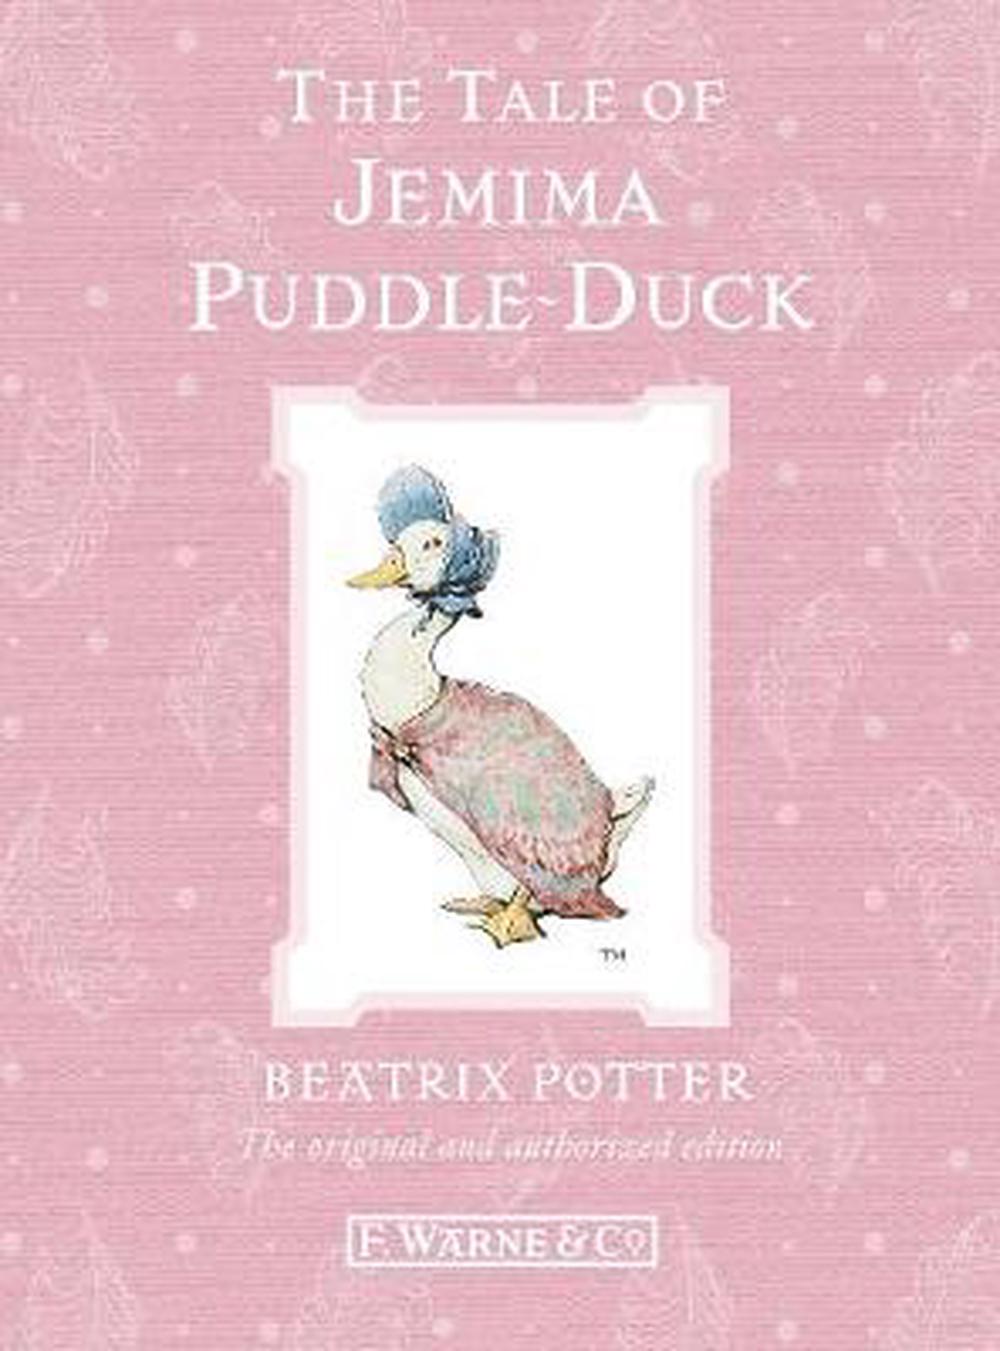 the tale of jemima puddle duck by beatrix potter